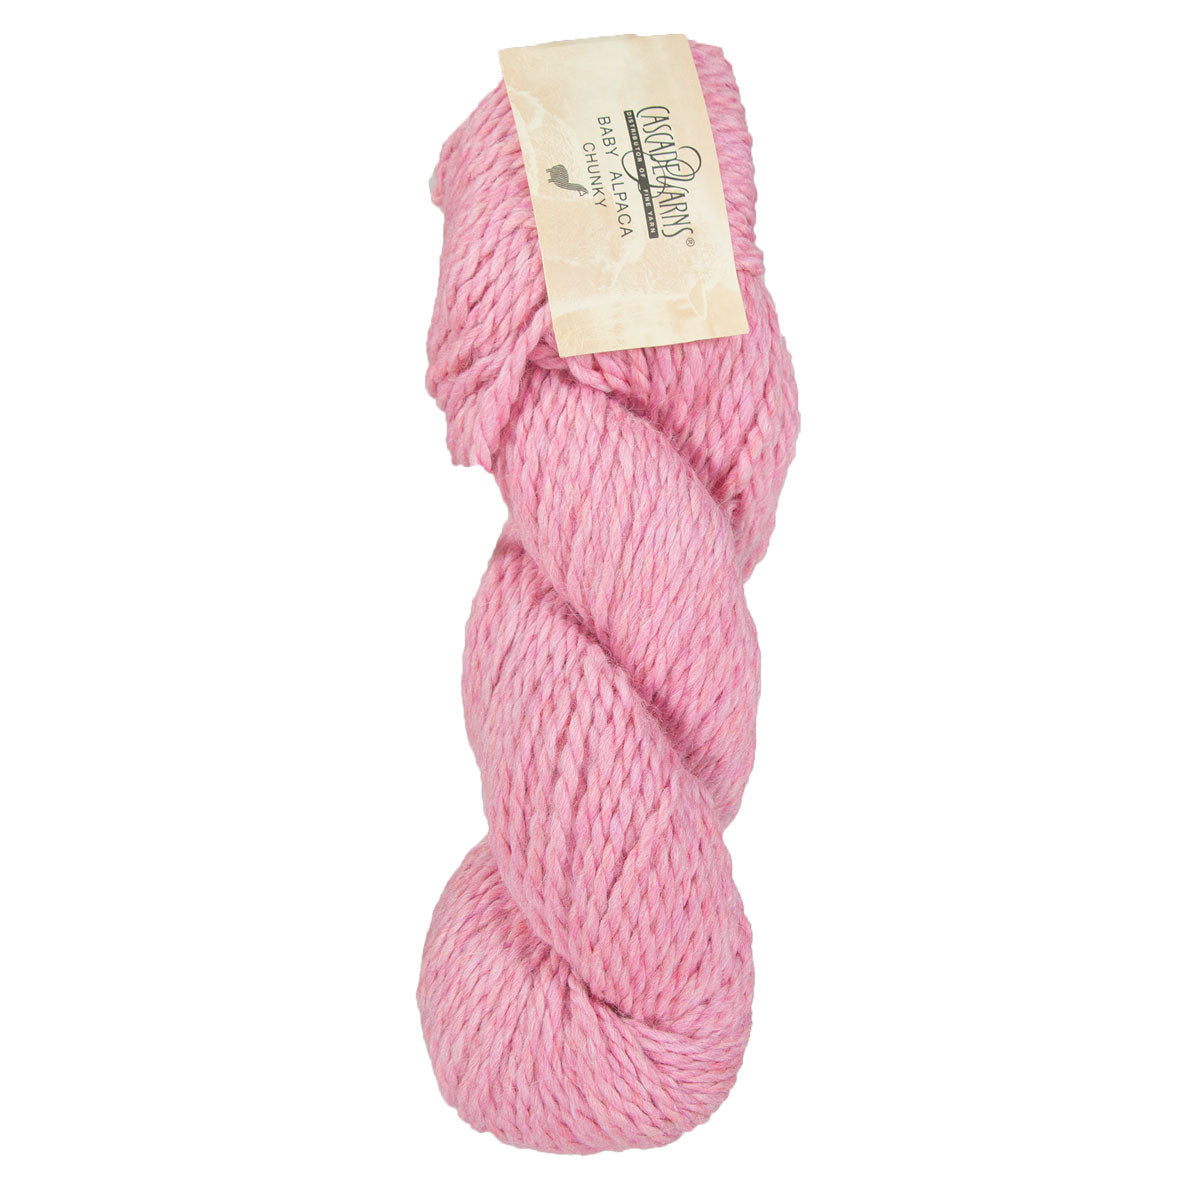 Skein of Cascade Baby Alpaca Chunky Bulky weight yarn in the color Petal Bloom (Pink) for knitting and crocheting.